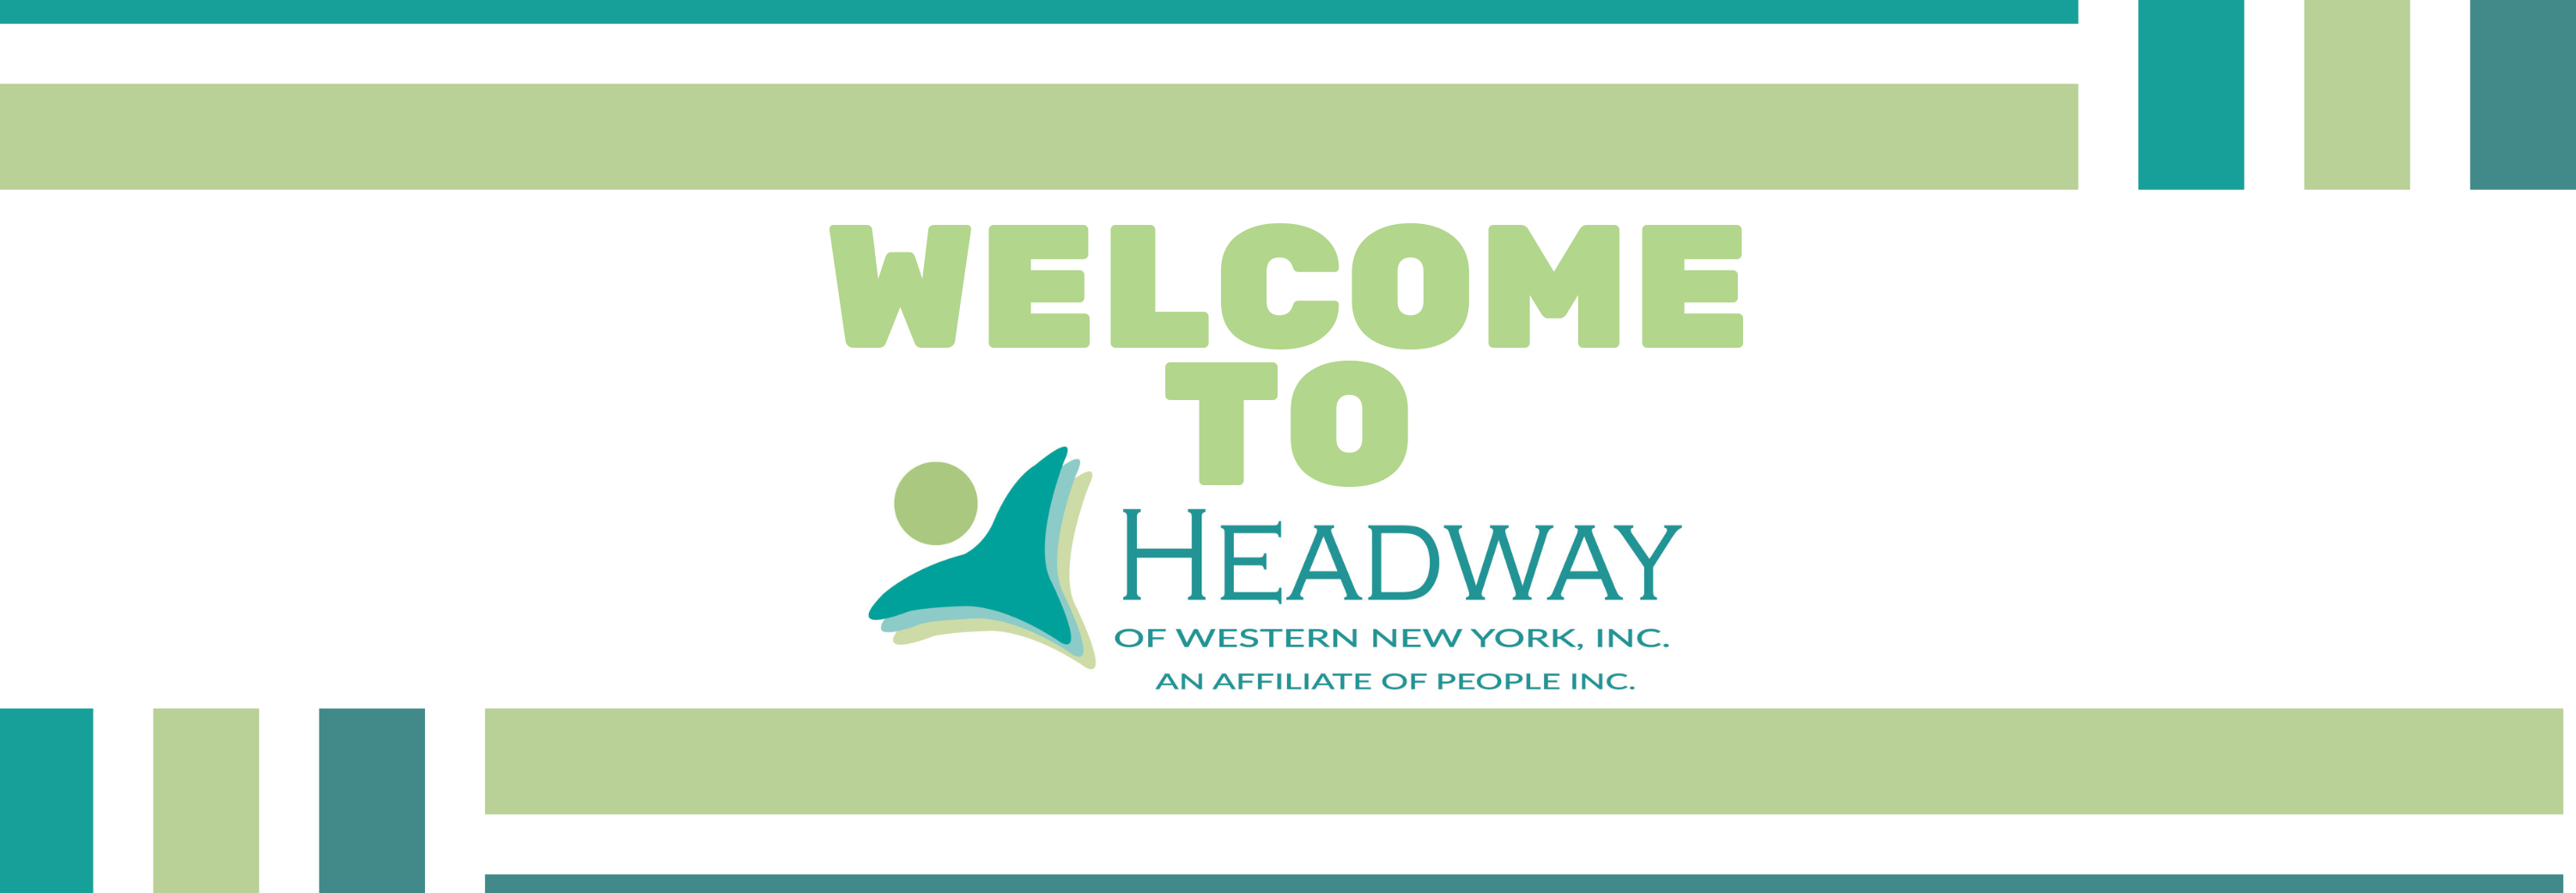 Welcome to Headway